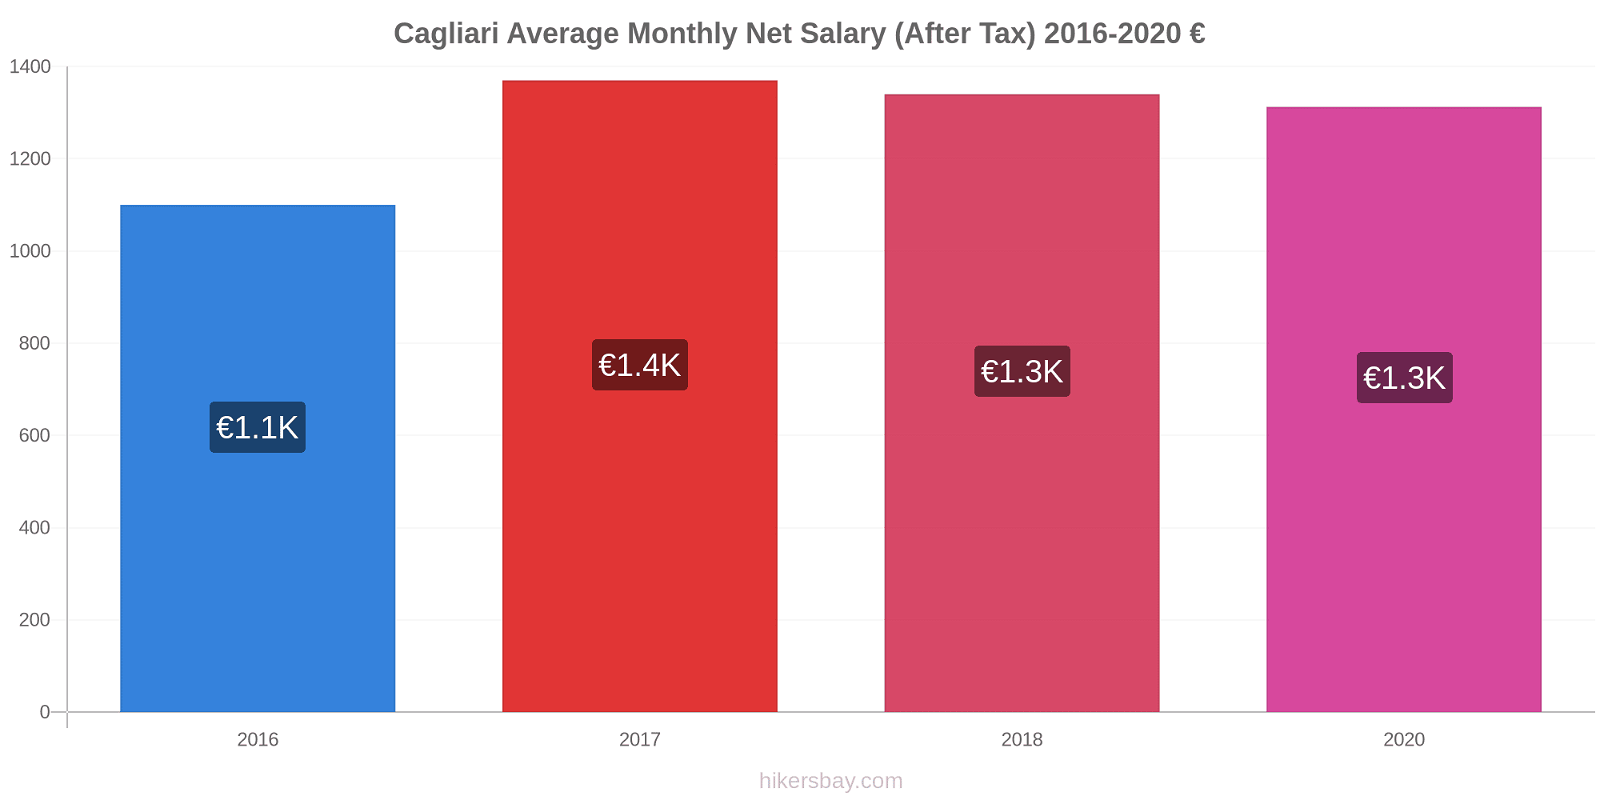 Cagliari price changes Average Monthly Net Salary (After Tax) hikersbay.com